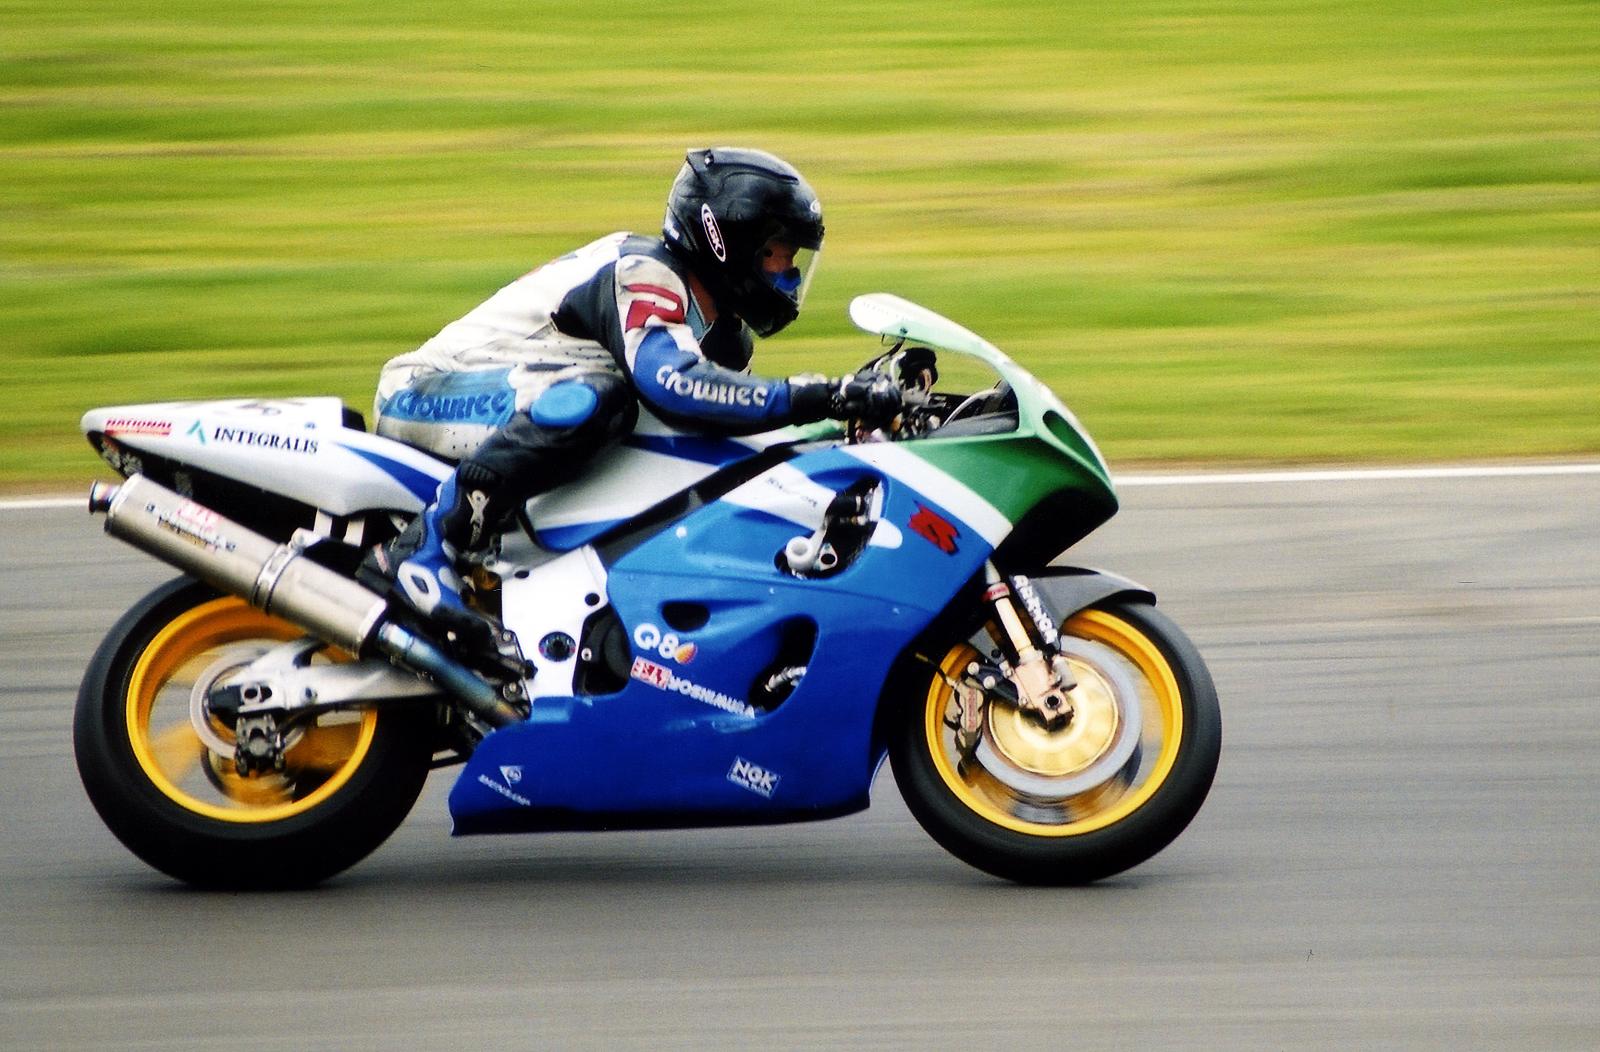 a man riding a motorcycle on a race track